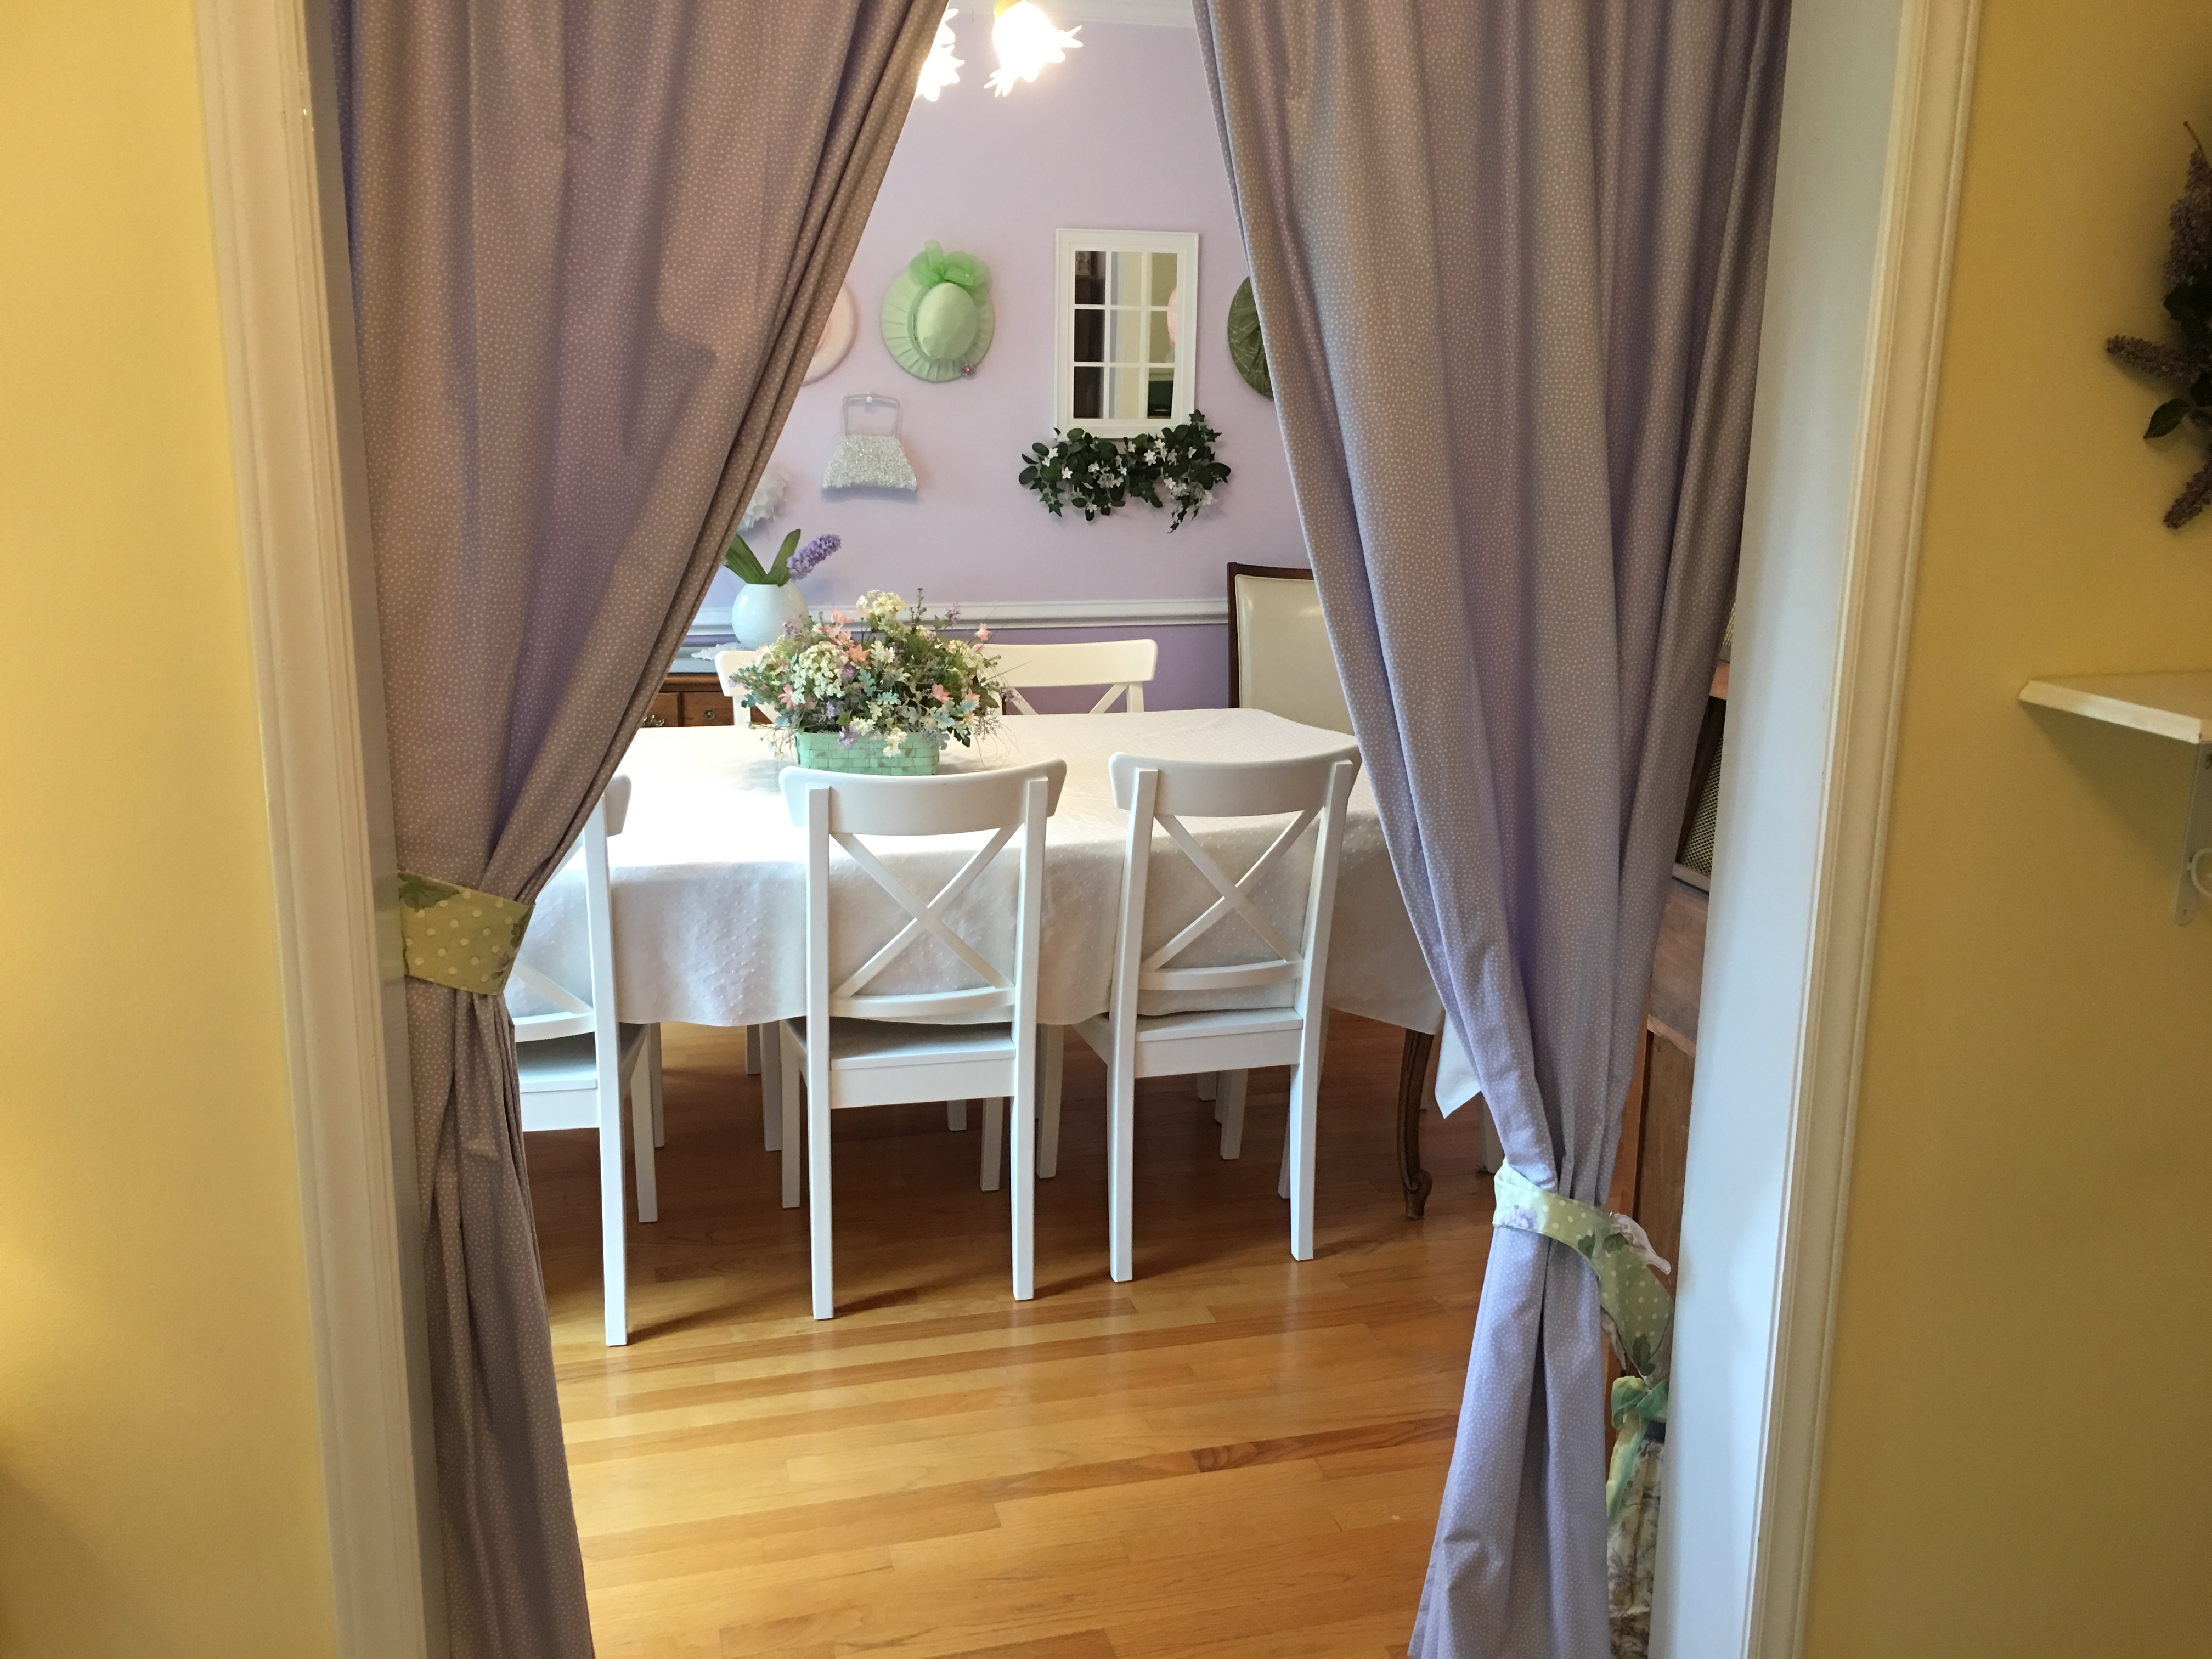 Peek into the Purple Dining room from the foyer